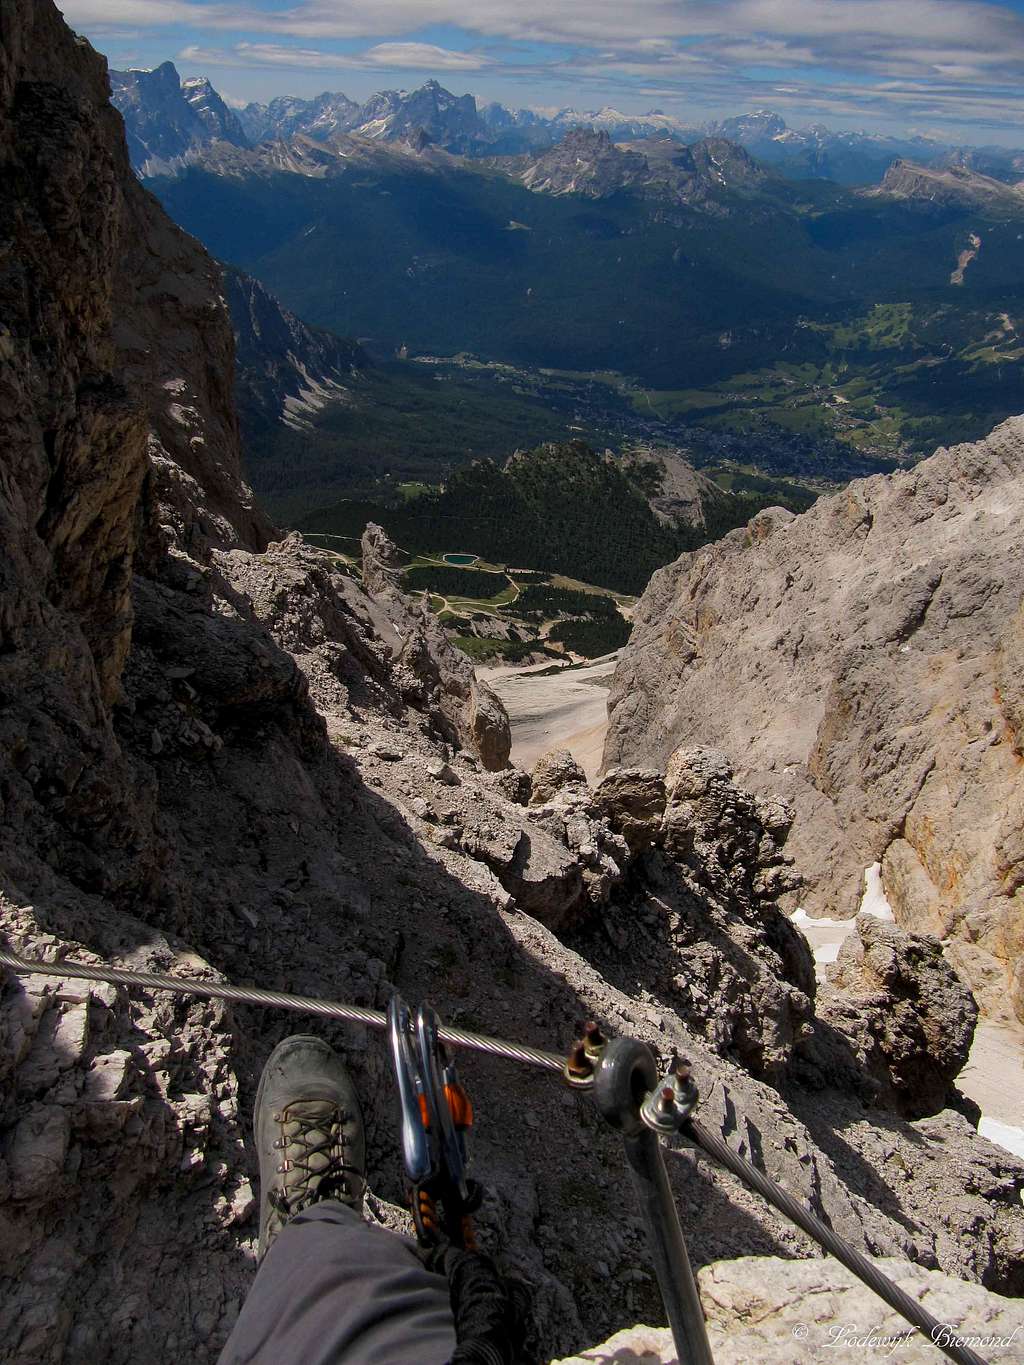 View towards Cortina from the Ferrata